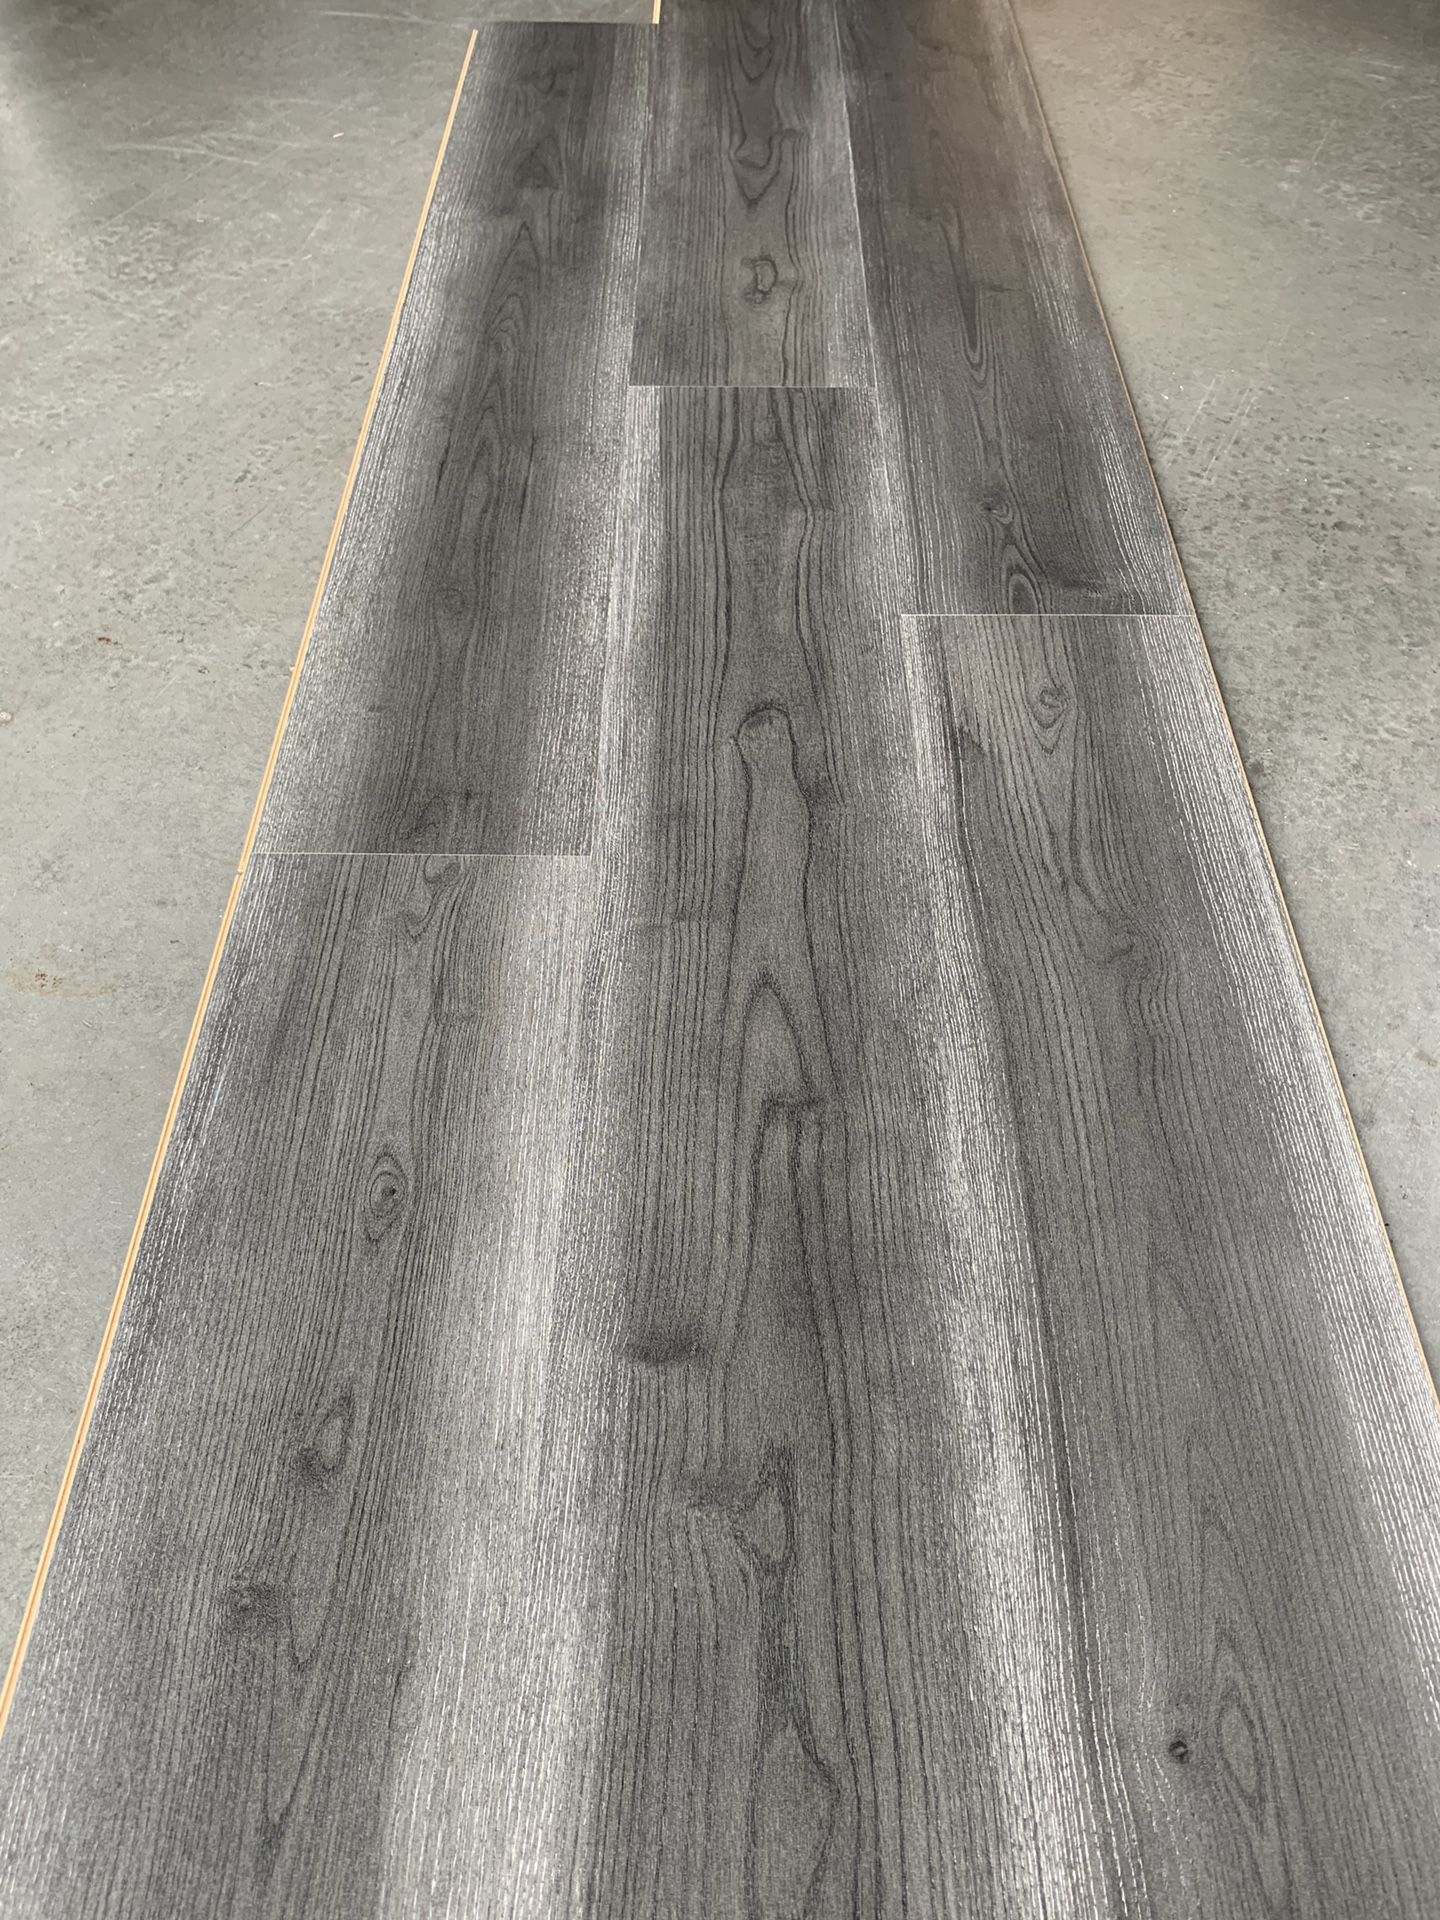 8mm laminate flooring w/pad included @ 1. 25/sf